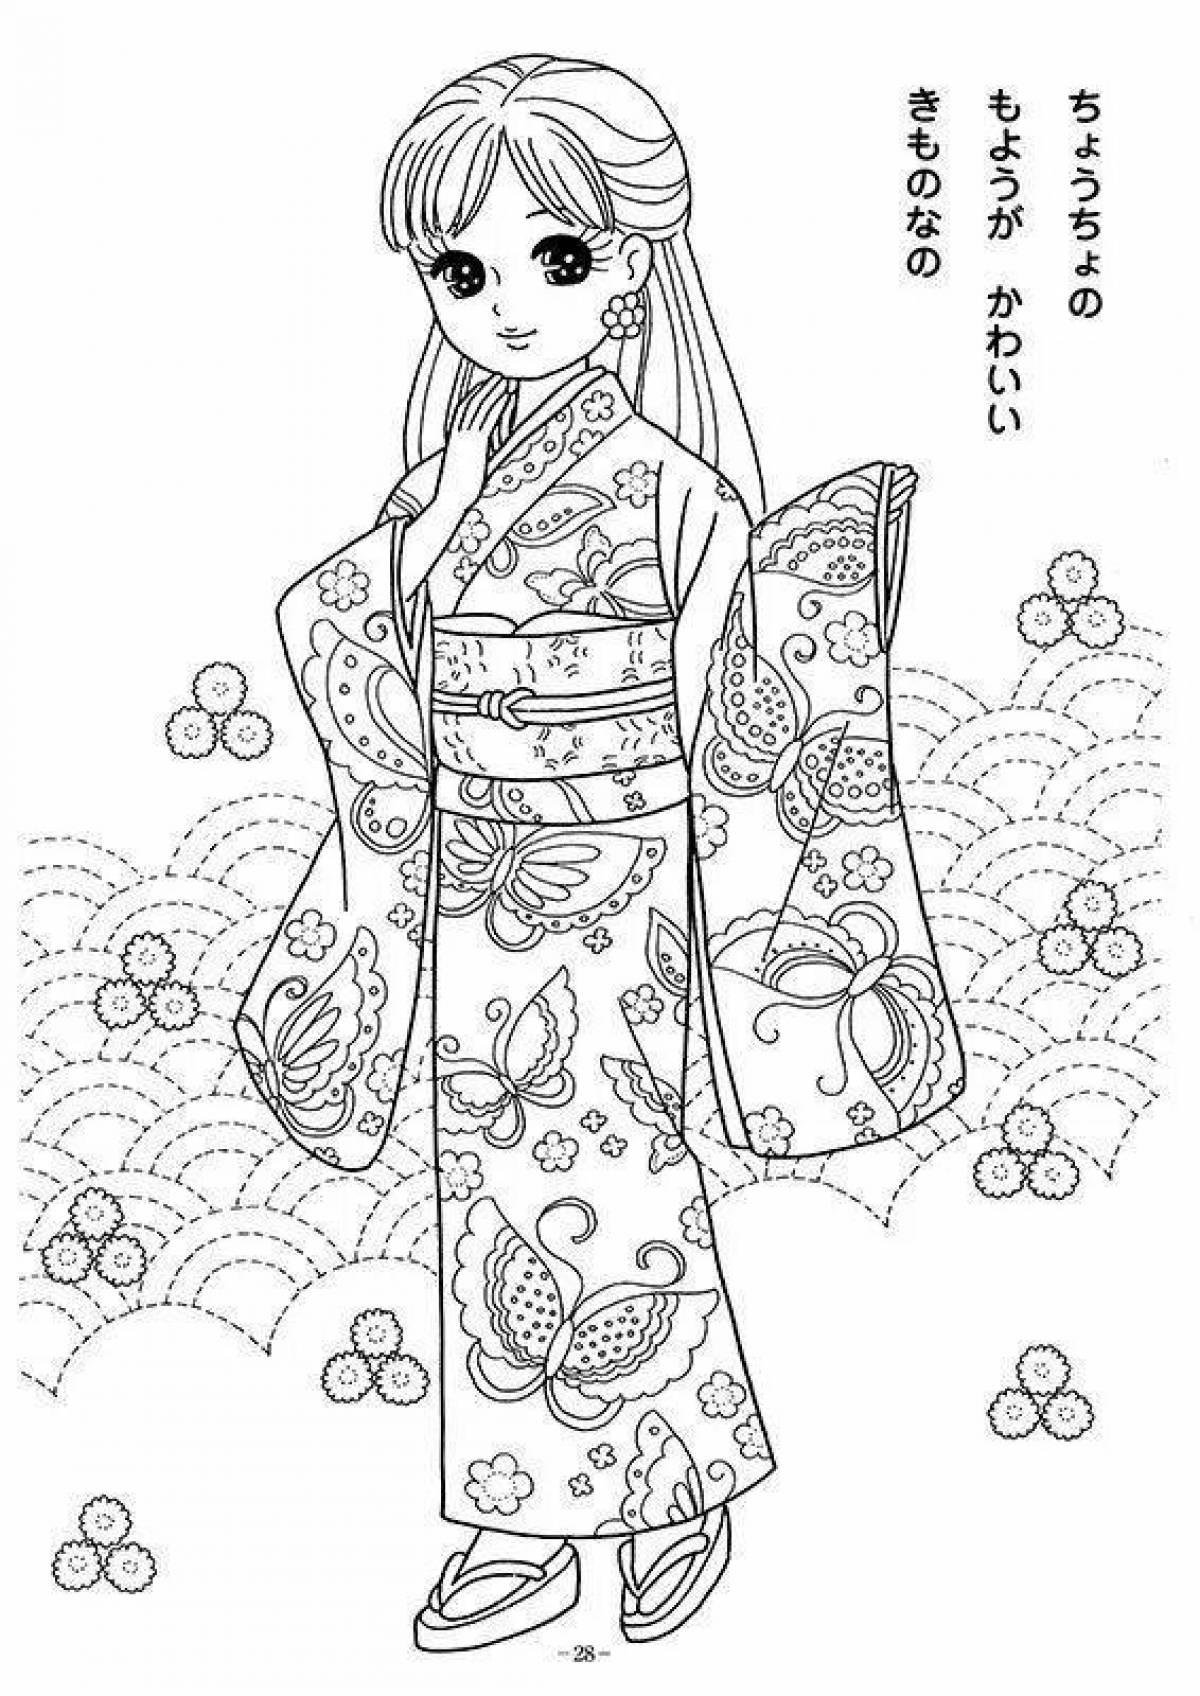 Amazing Japanese girl coloring book